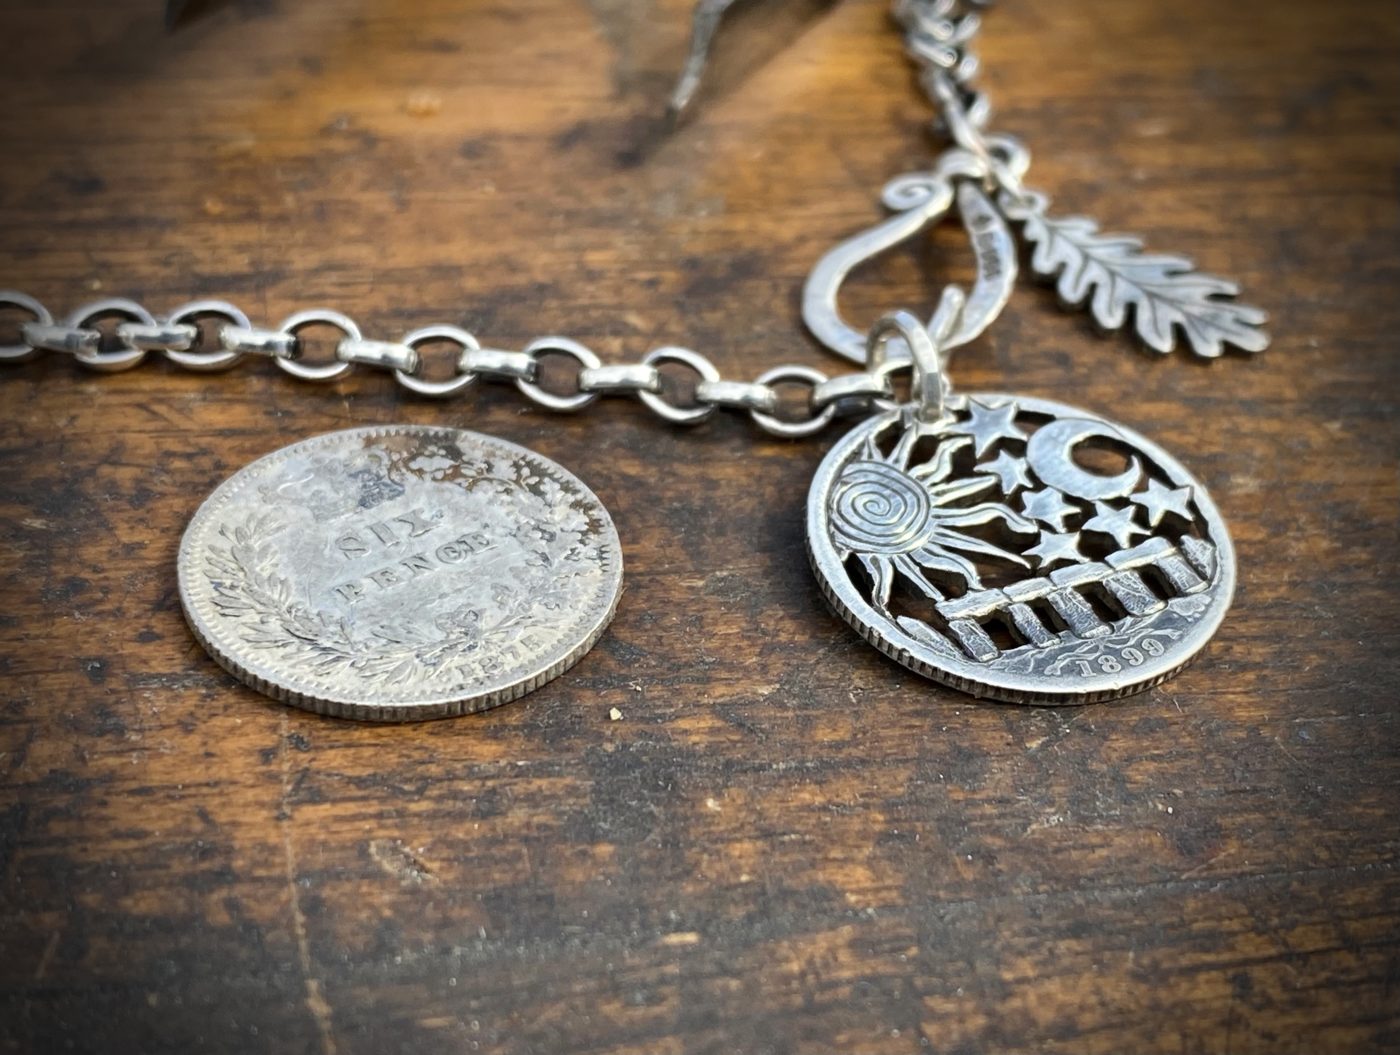 lucky sixpence Stonehenge solstice coin necklace pendant handmade in Cambridge